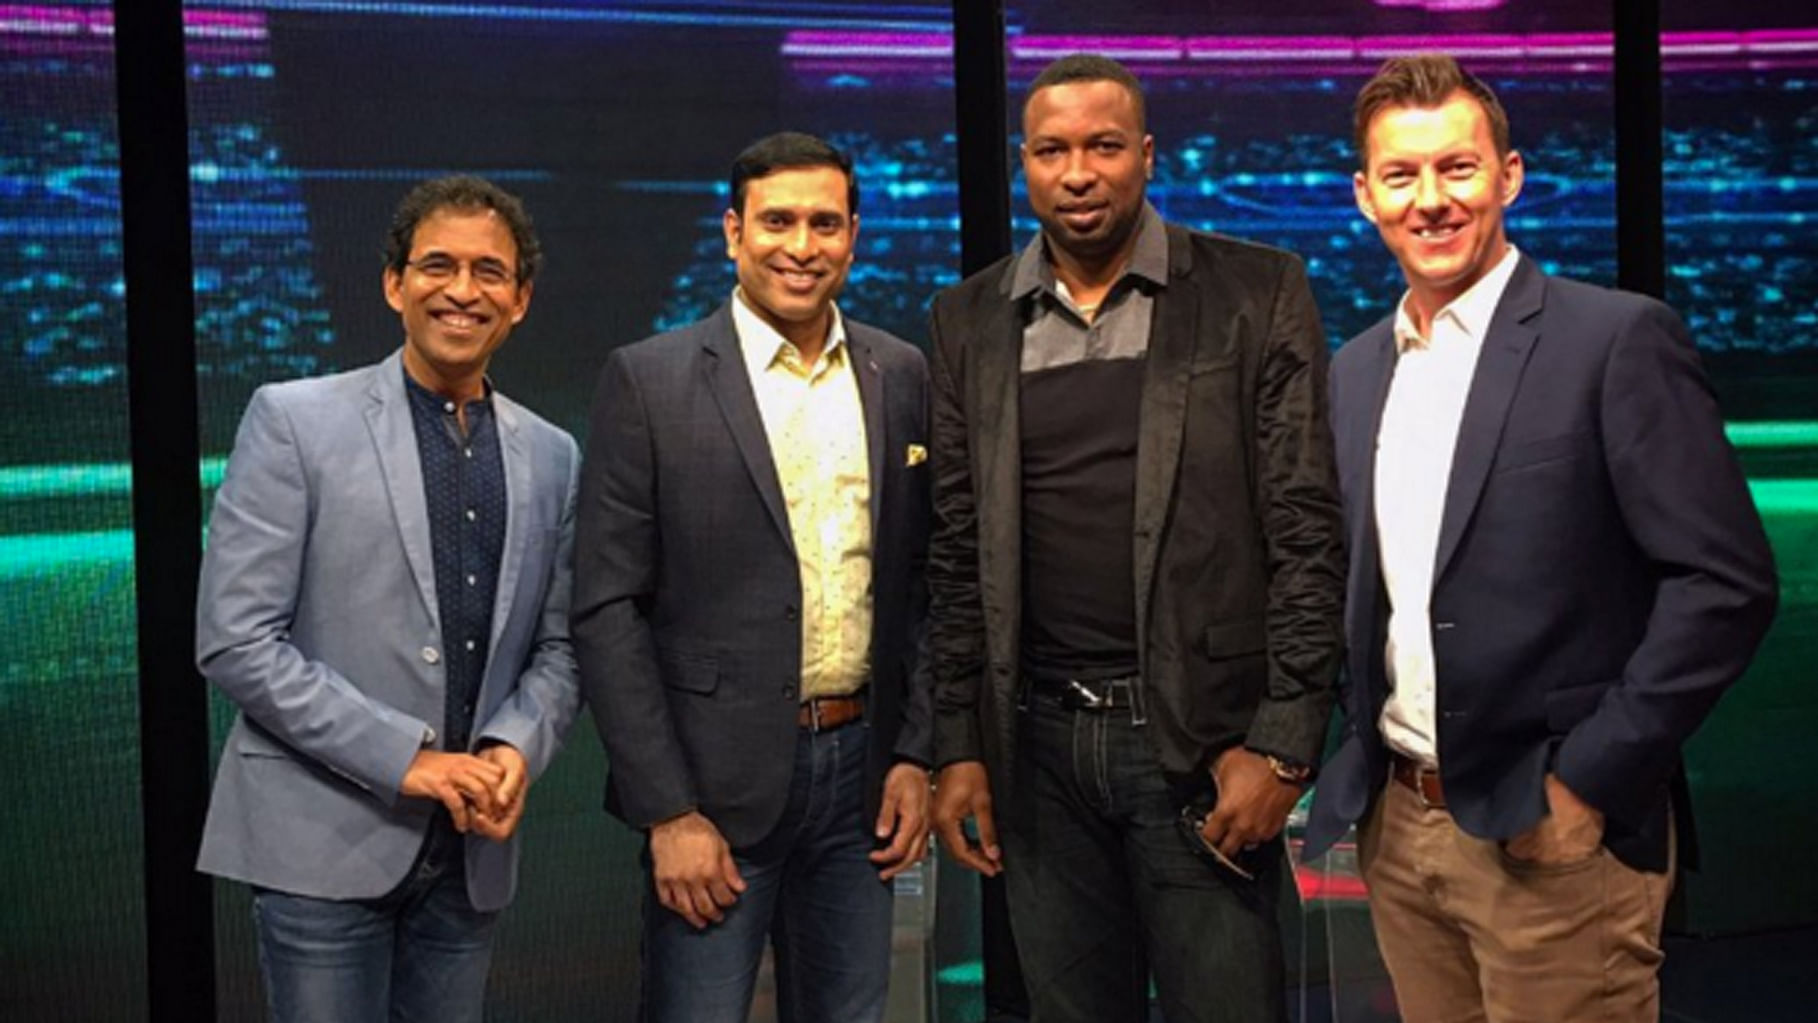 Harsha Bhogle with the World T20 final panelists. (Photo Courtesy: <a href="https://twitter.com/bhogleharsha/media">Twitter/@bhogleharsha</a>)